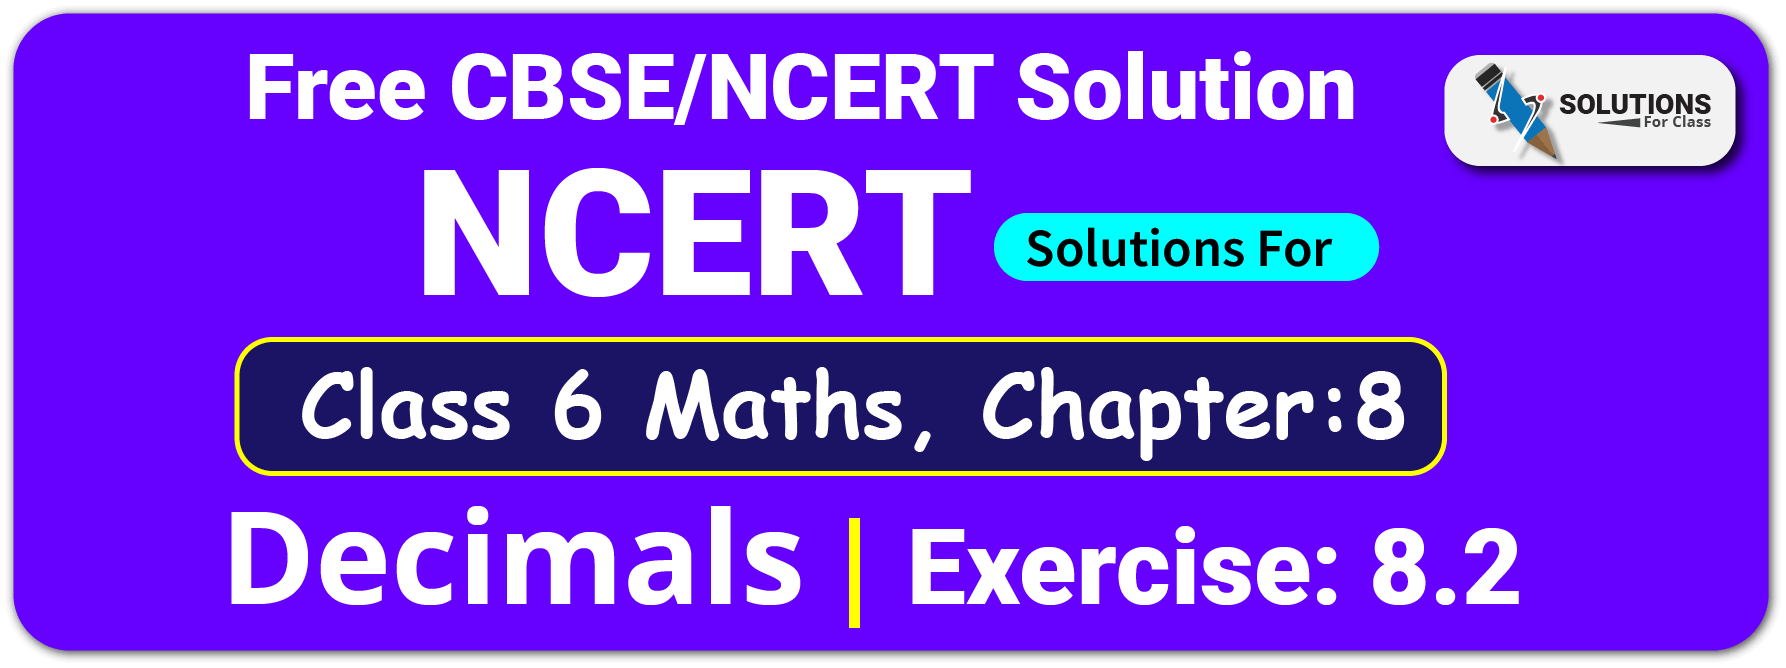 NCERT Solutions For Class 6 Maths Chapter 8 Decimals Exercise 8.2